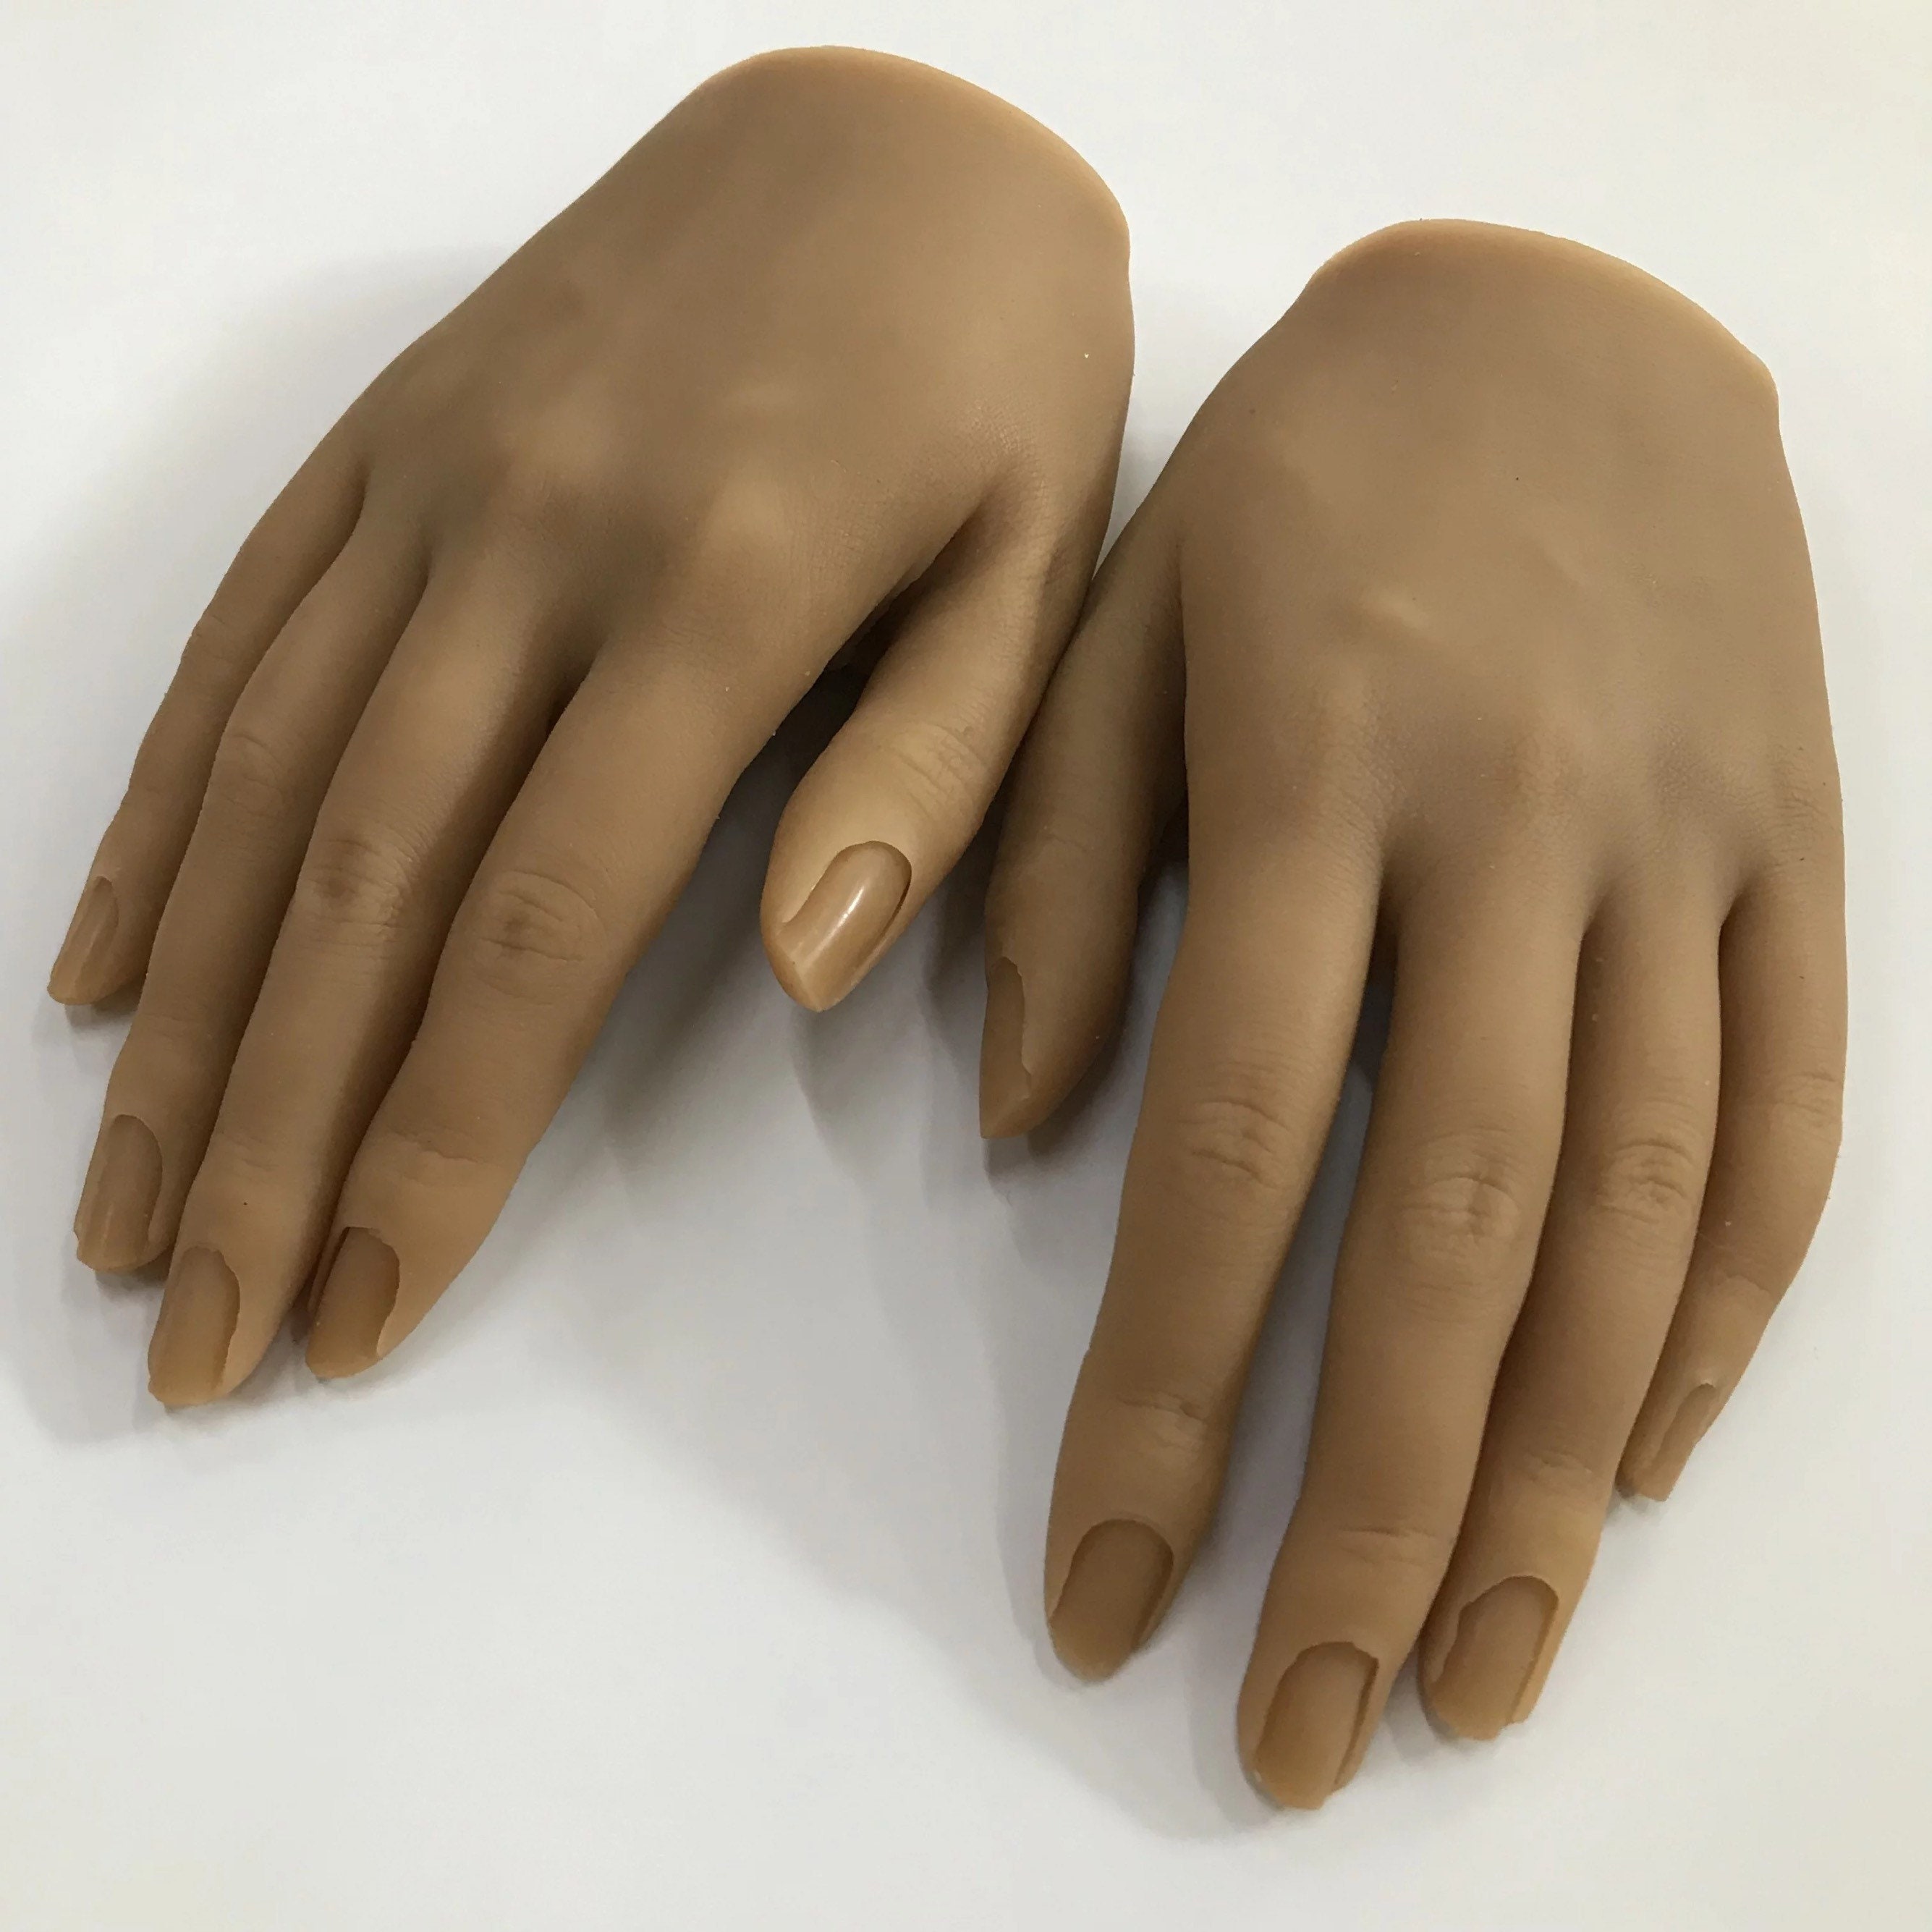 Realistic Full Silicone Practice Hands 